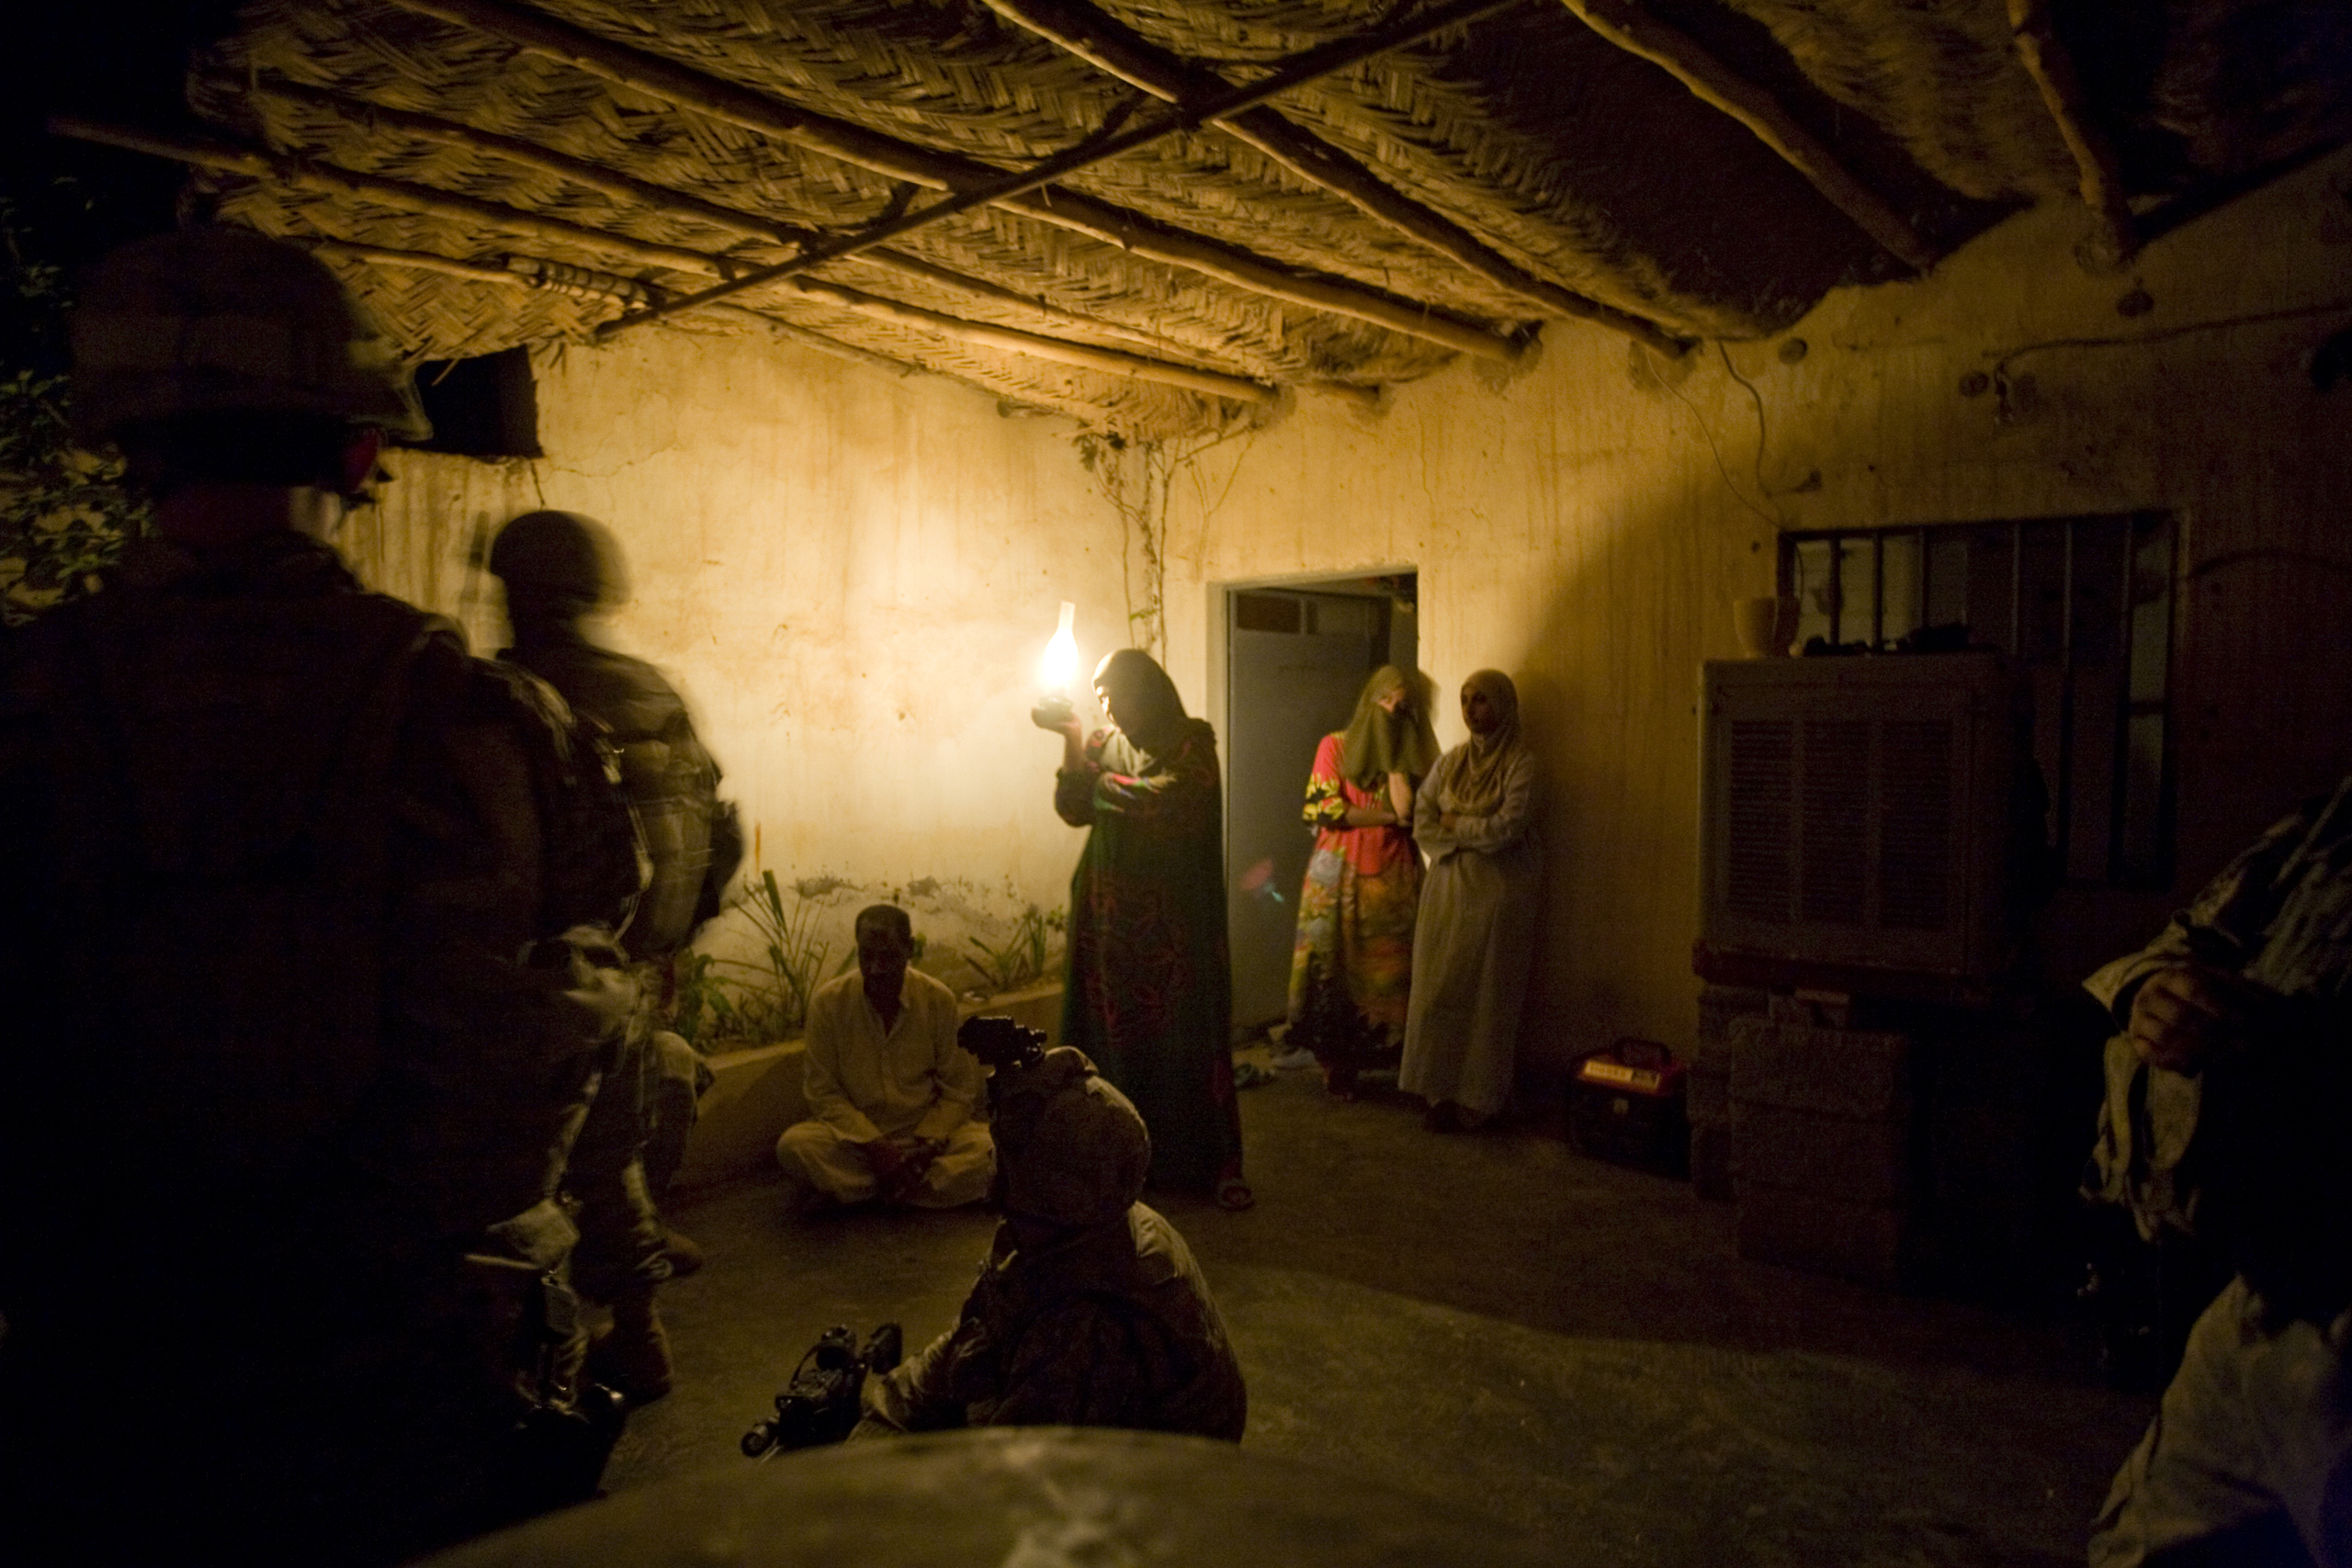 Soldiers from the 2nd Battalion search a home in the town of Al Arasa, located on the outskirts of Muqdadiyah, Diyala province, Iraq on Oct. 6, 2007. The area, approximately 56 miles (90 kilometers) north of Baghdad, is a known al Qaeda stronghold.